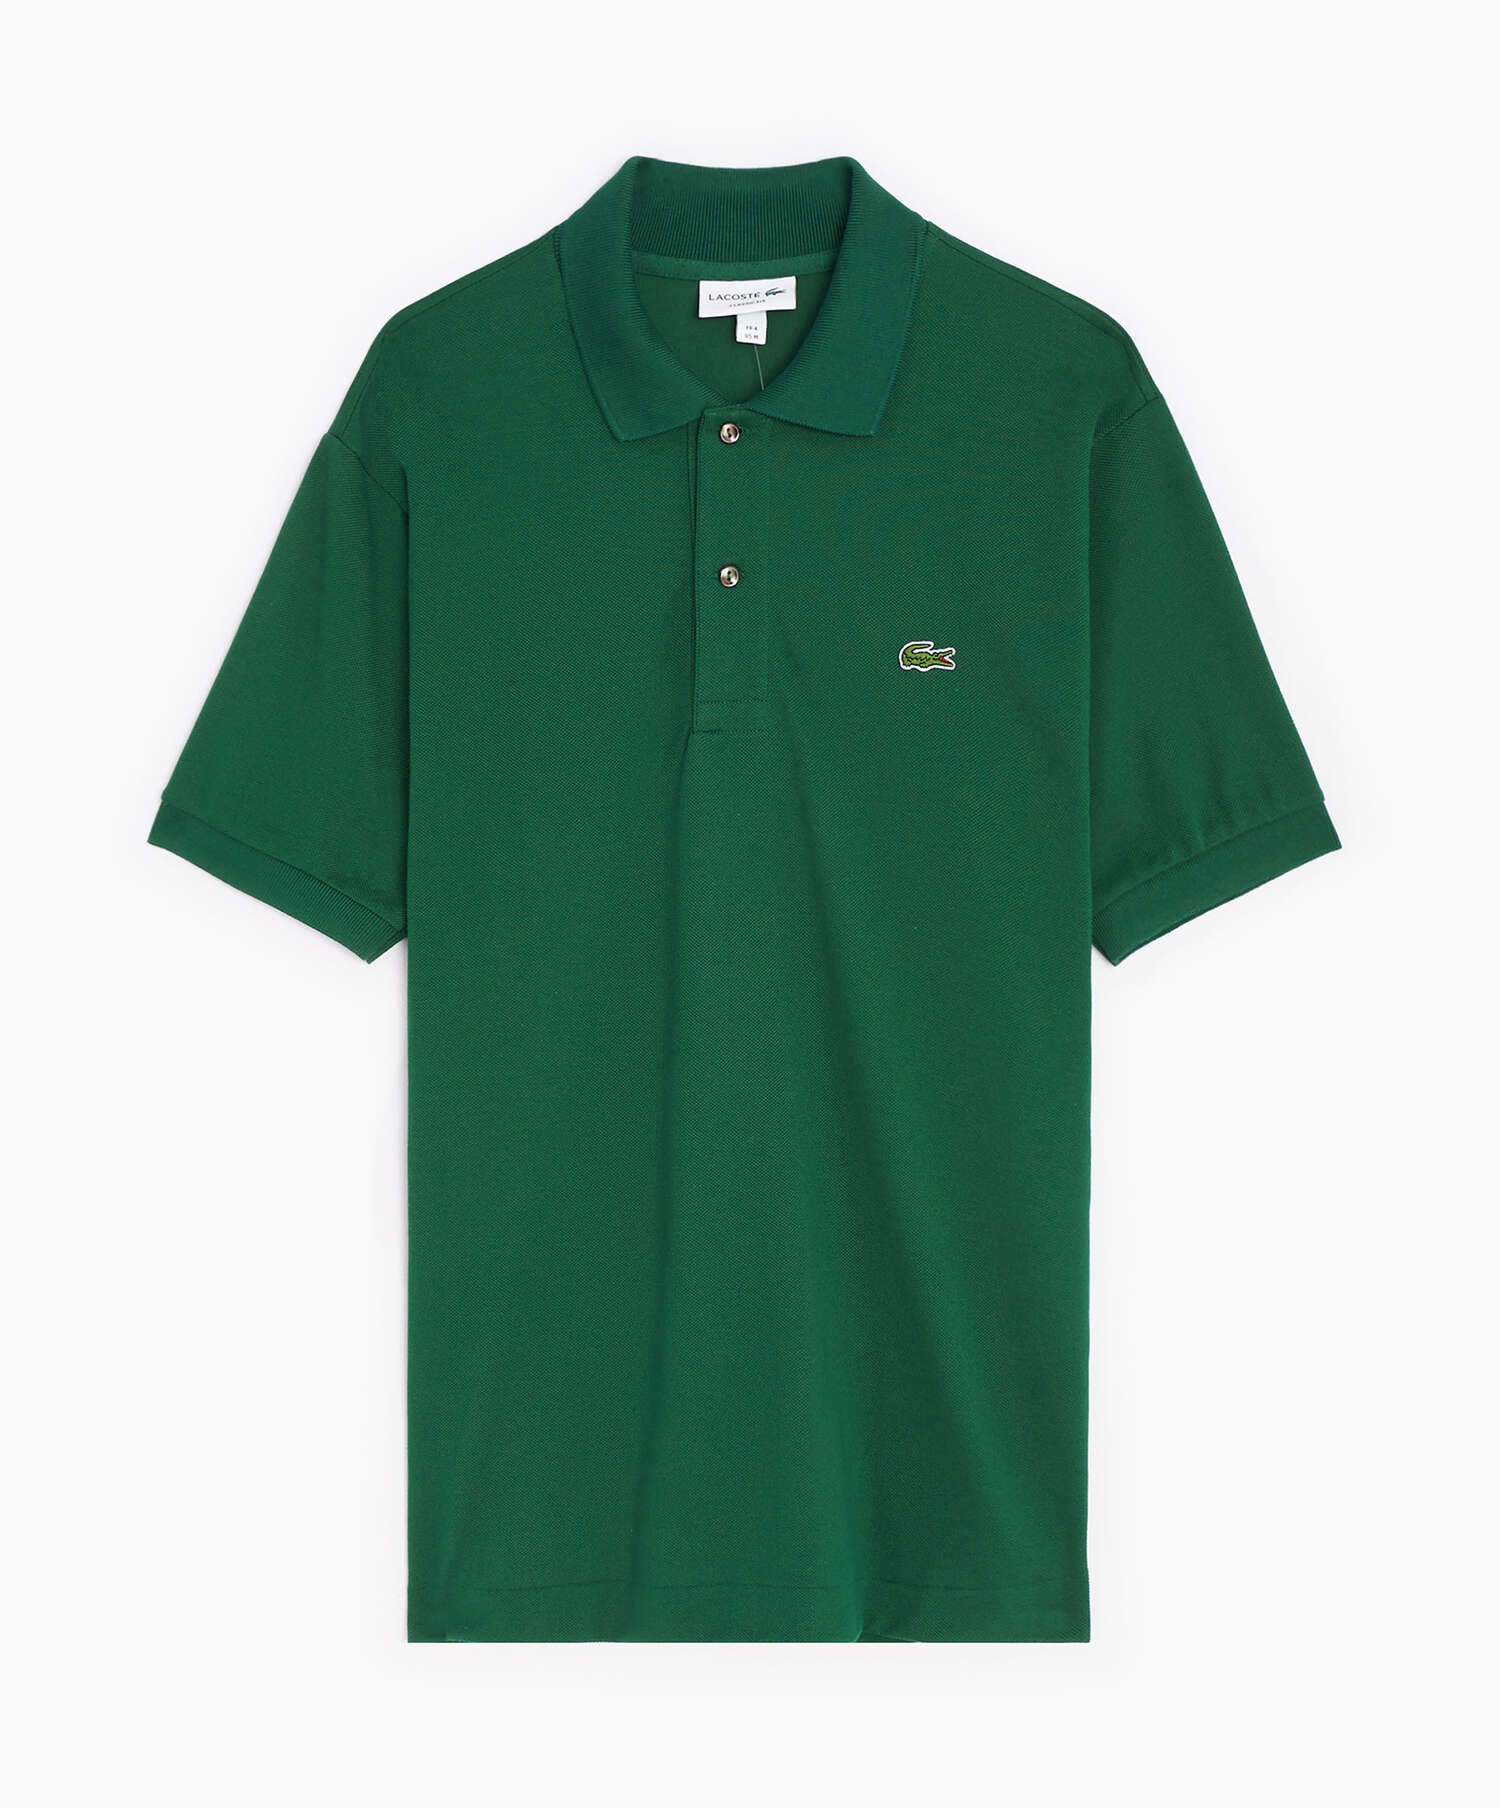 Lacoste Classic Fit Men's Short-Sleeve Polo Green L1212-00-132| Buy Online at